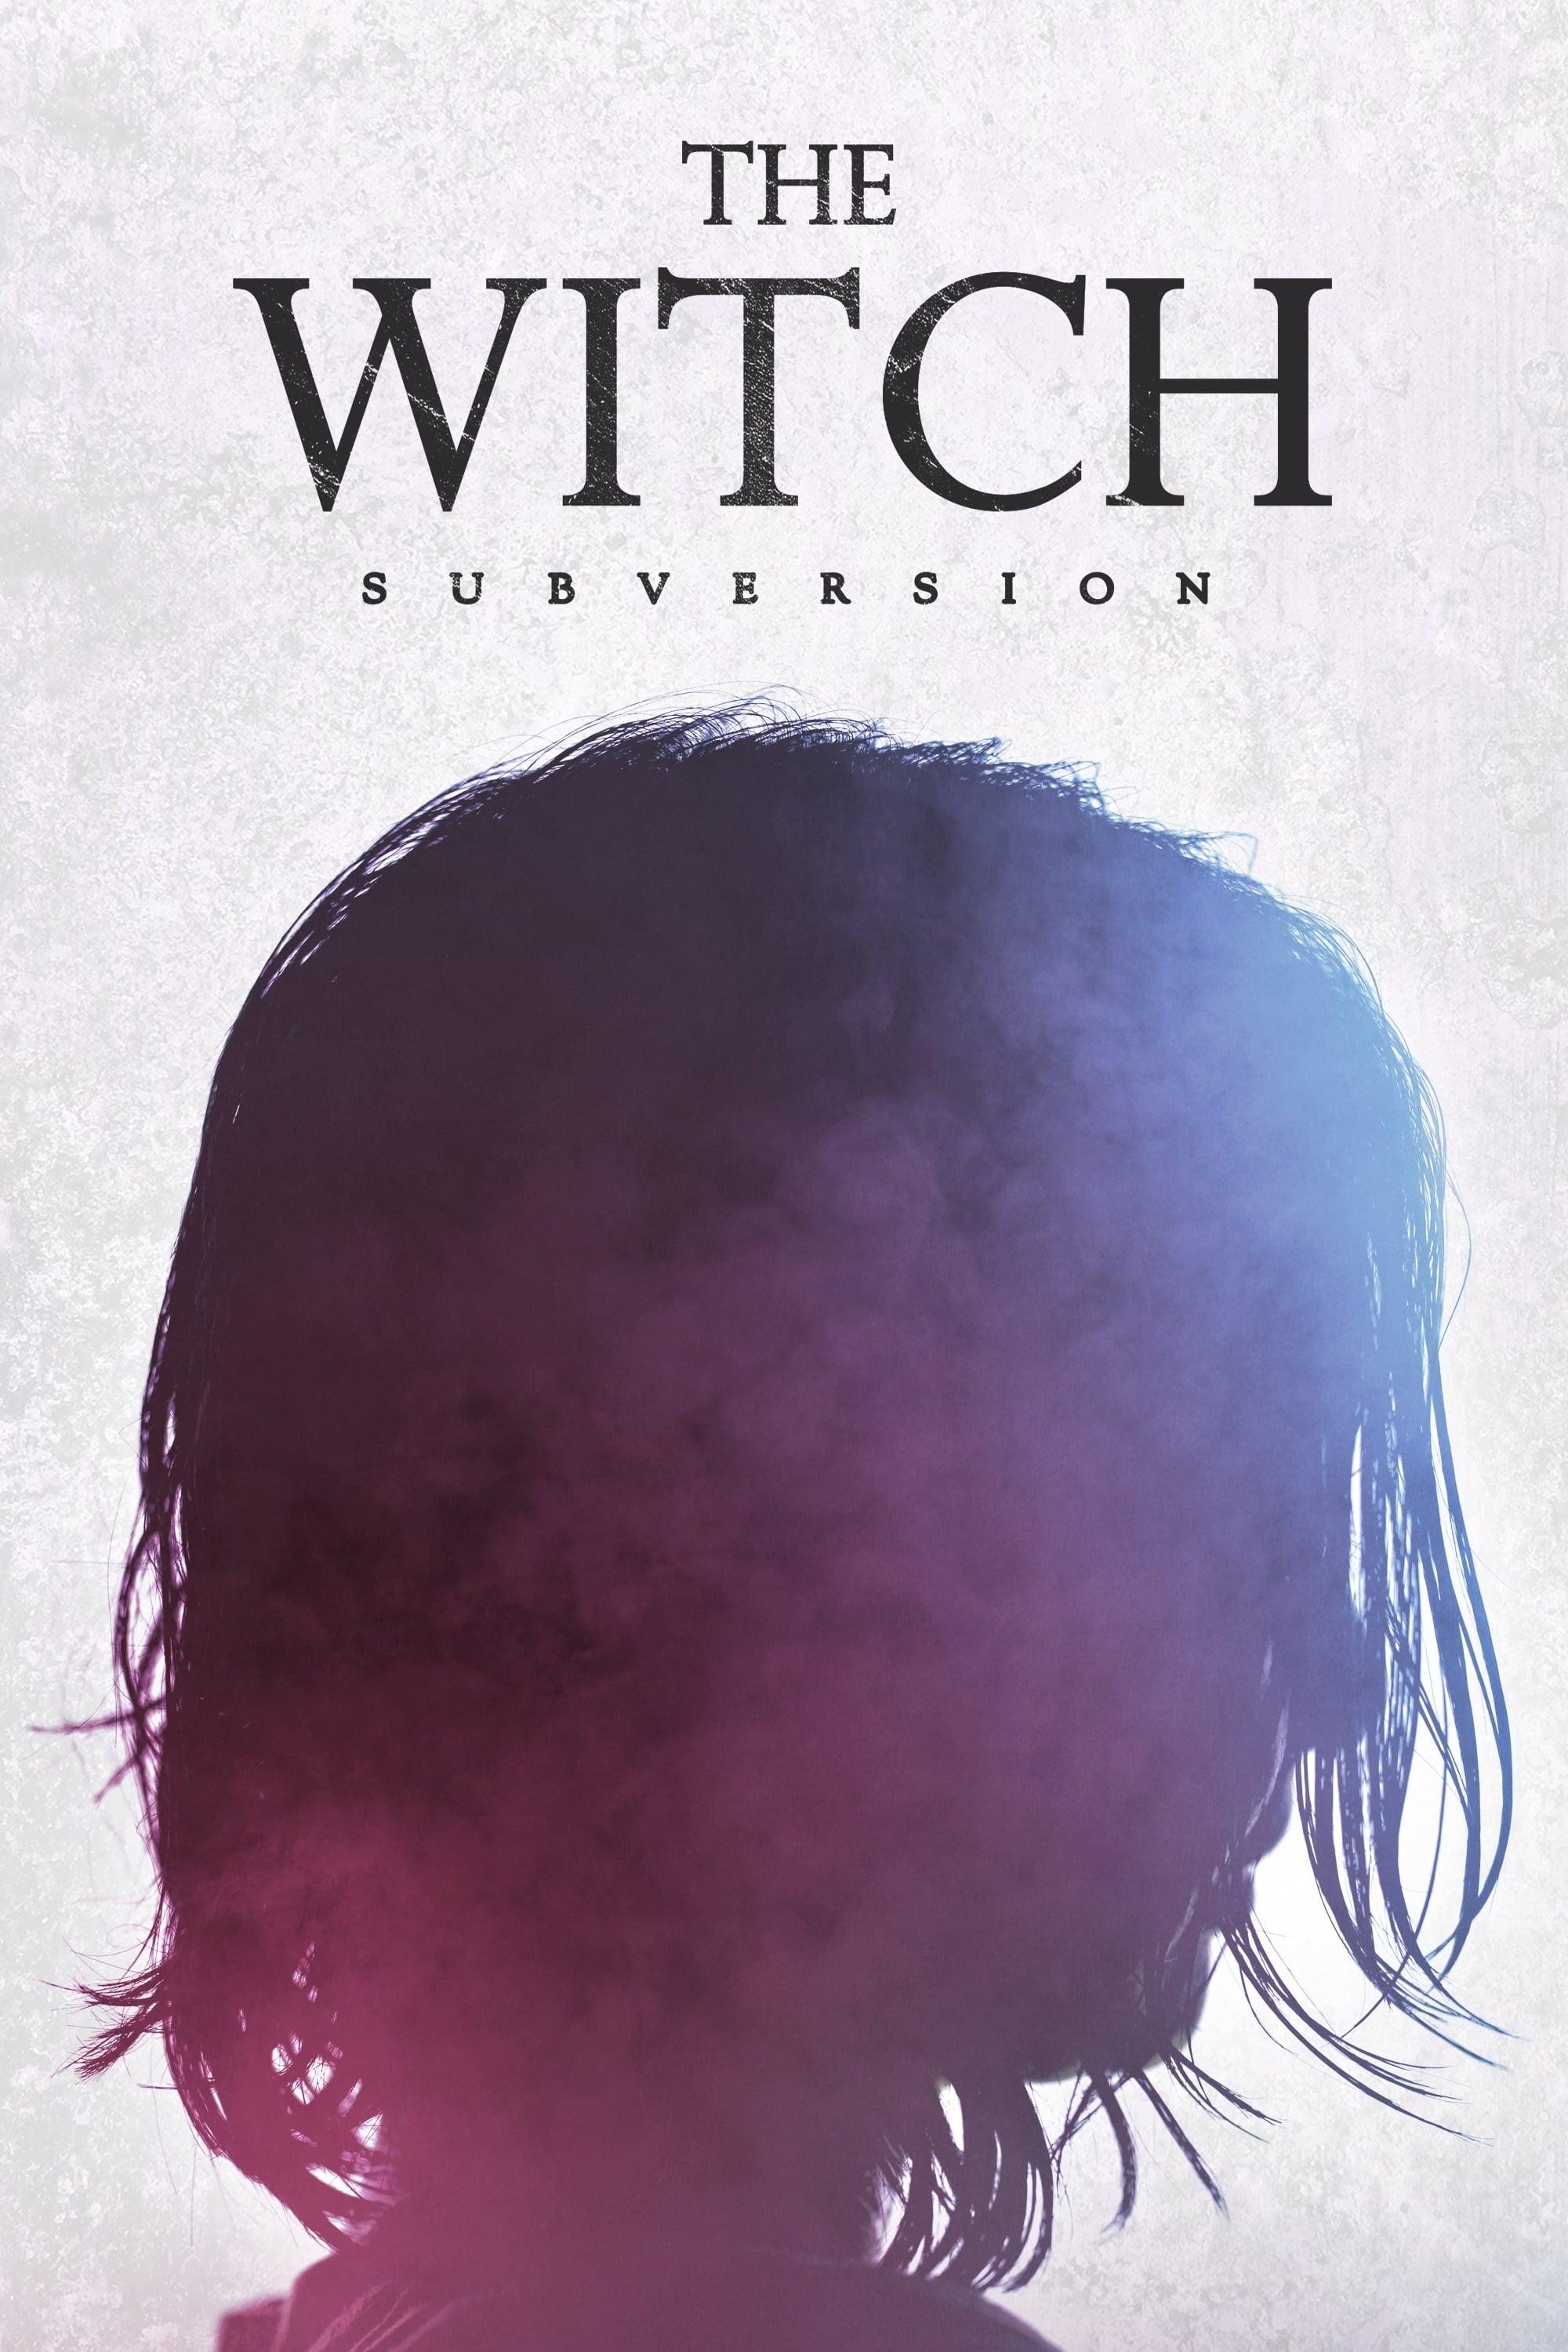 The Witch: Part 1. The Subversion poster